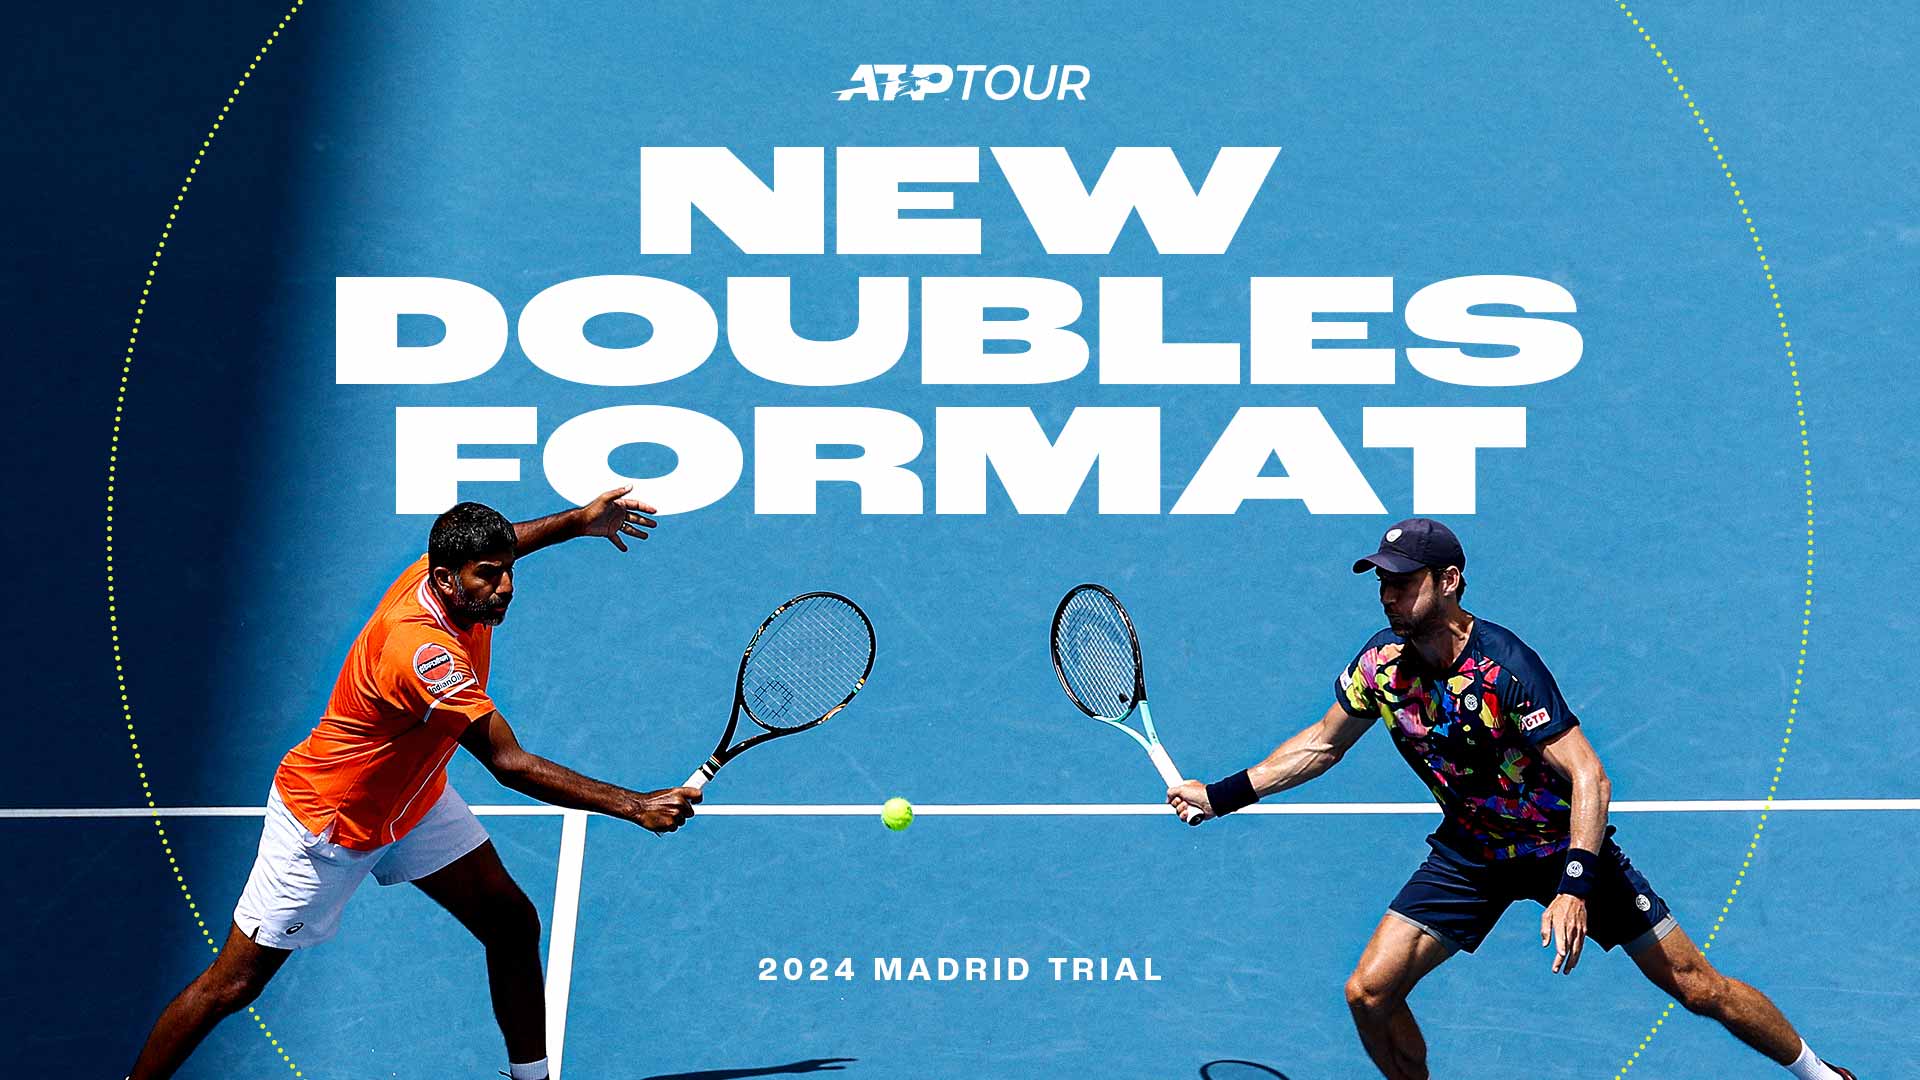 New doubles format